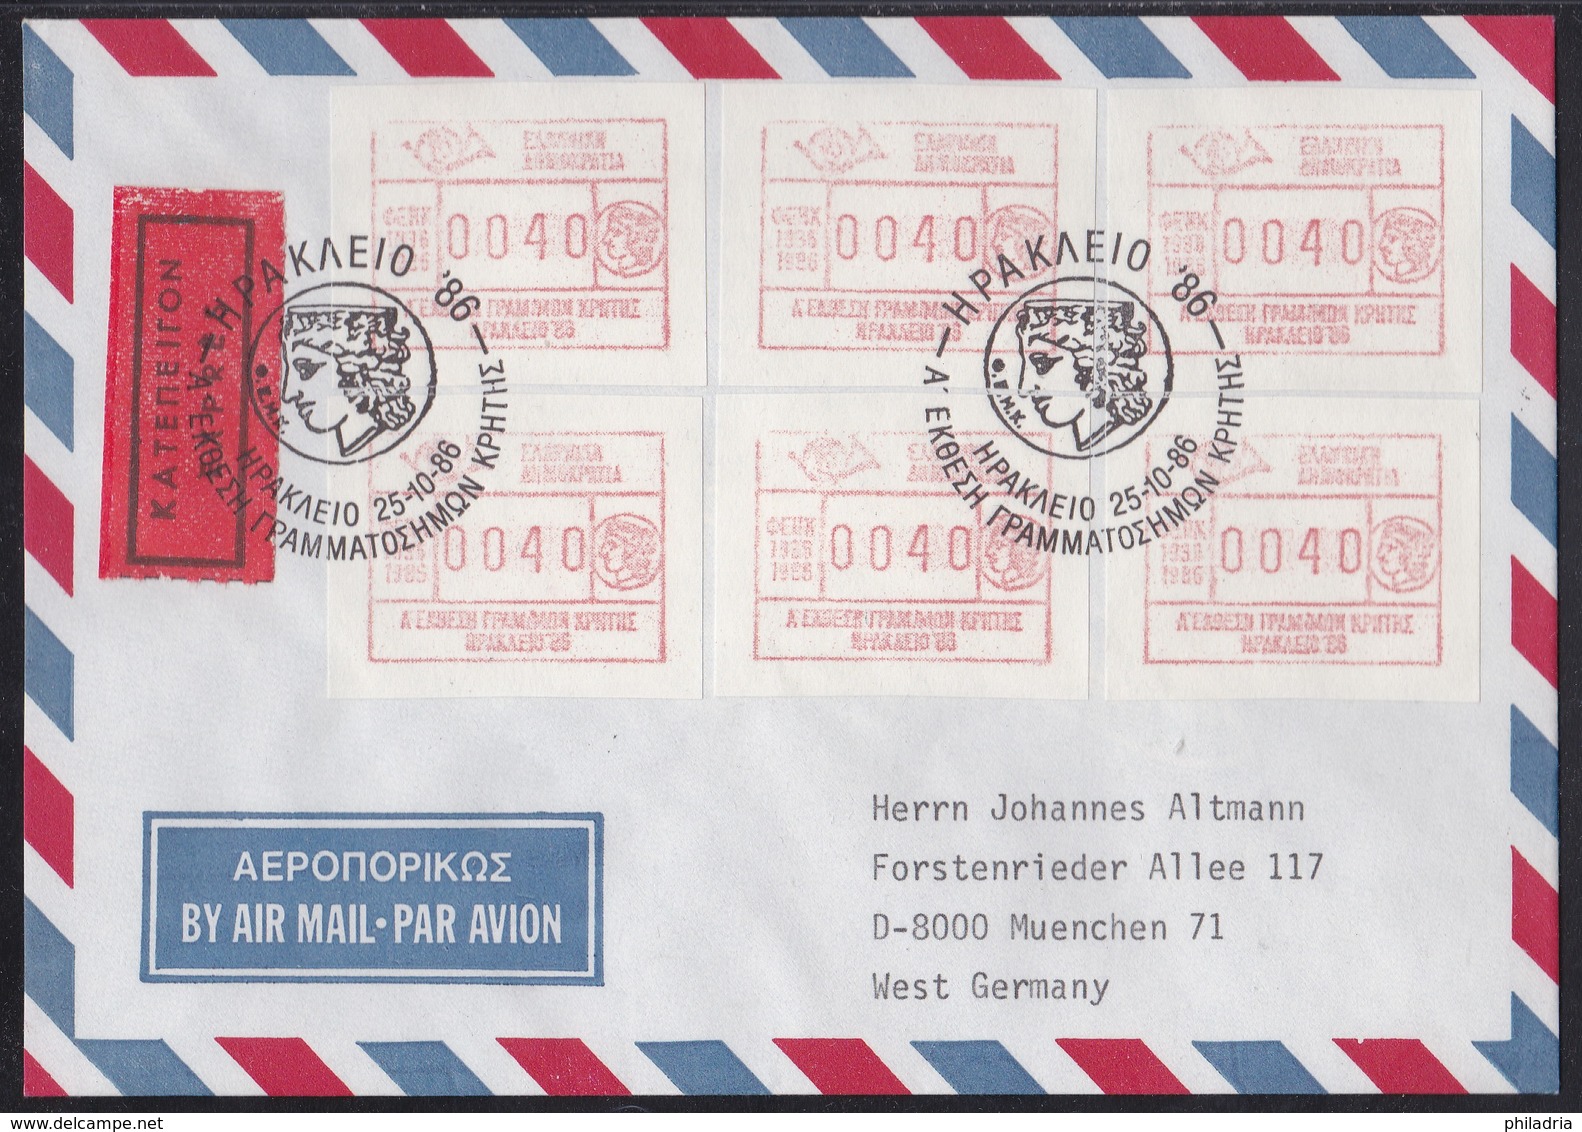 Greece, ATM, 1986, Airmail Express To Germany - Machine Labels [ATM]